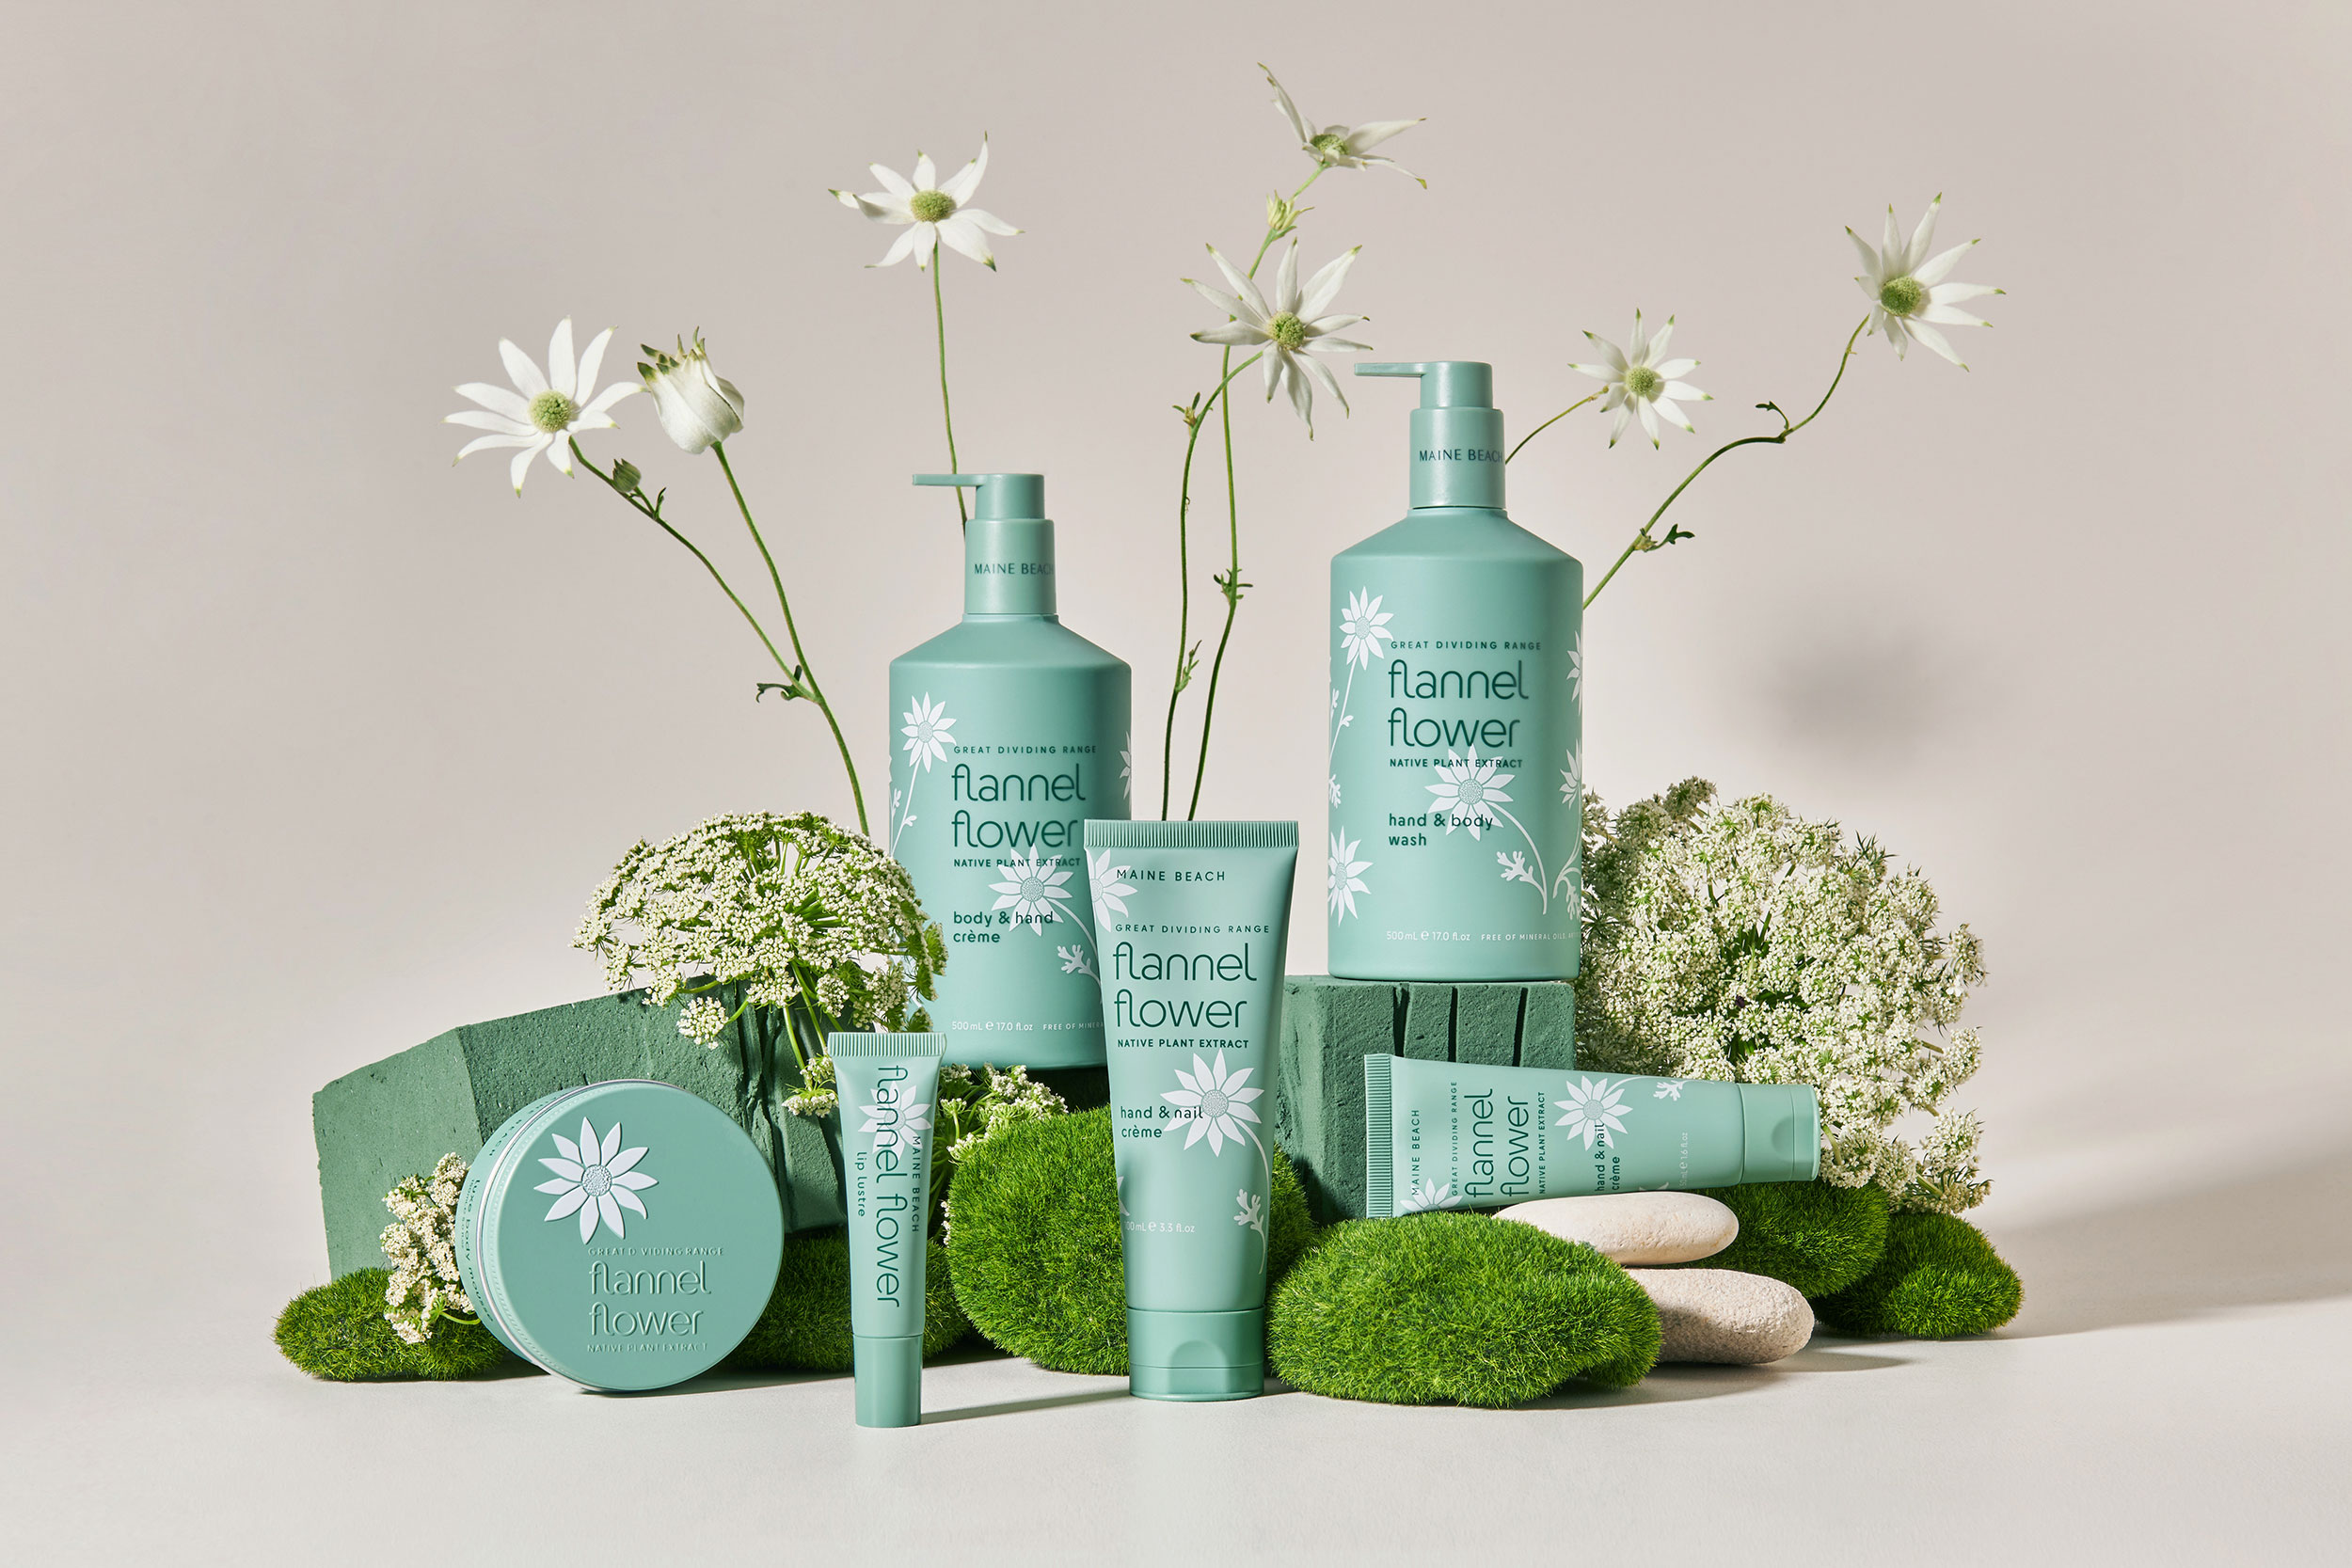 Flannel Flower Skincare Packaging by Harcus Design